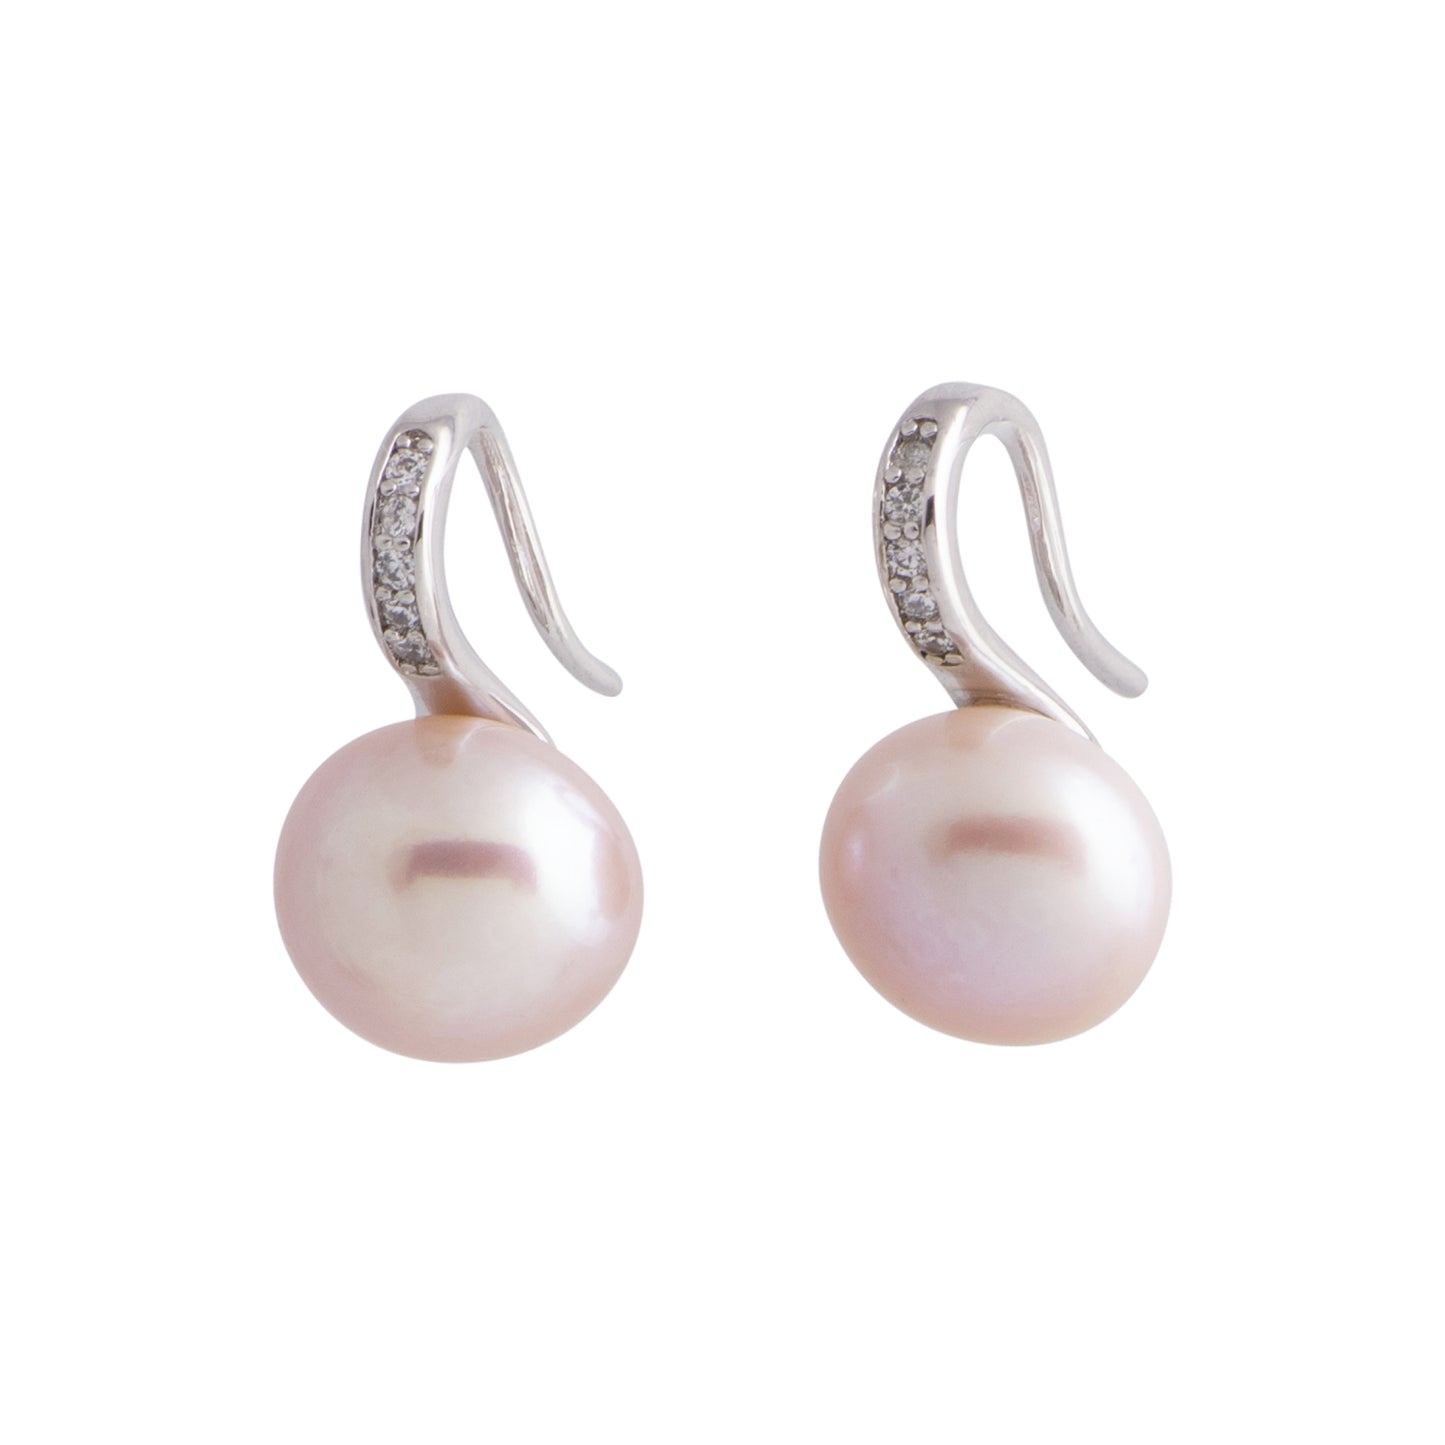 Europa - Silver-tone huggie earring with freshwater pearl (Natural pearls)